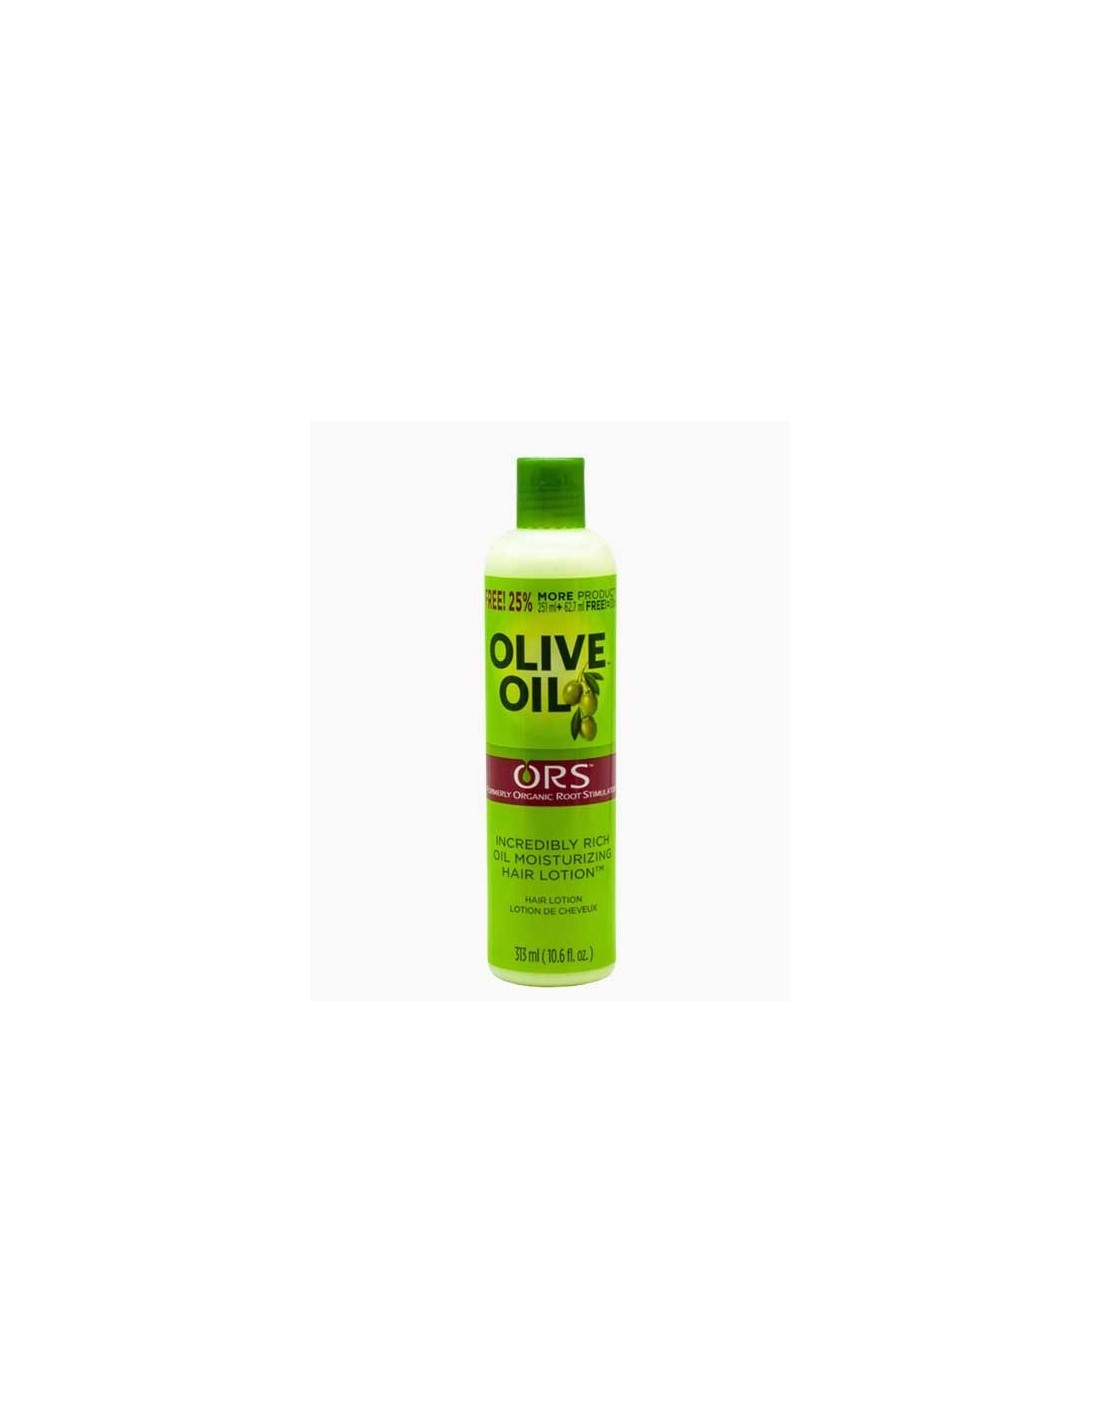 Ors Olive Oil Incredibly Rich Oil Moisturizing Hair Lotion 4516